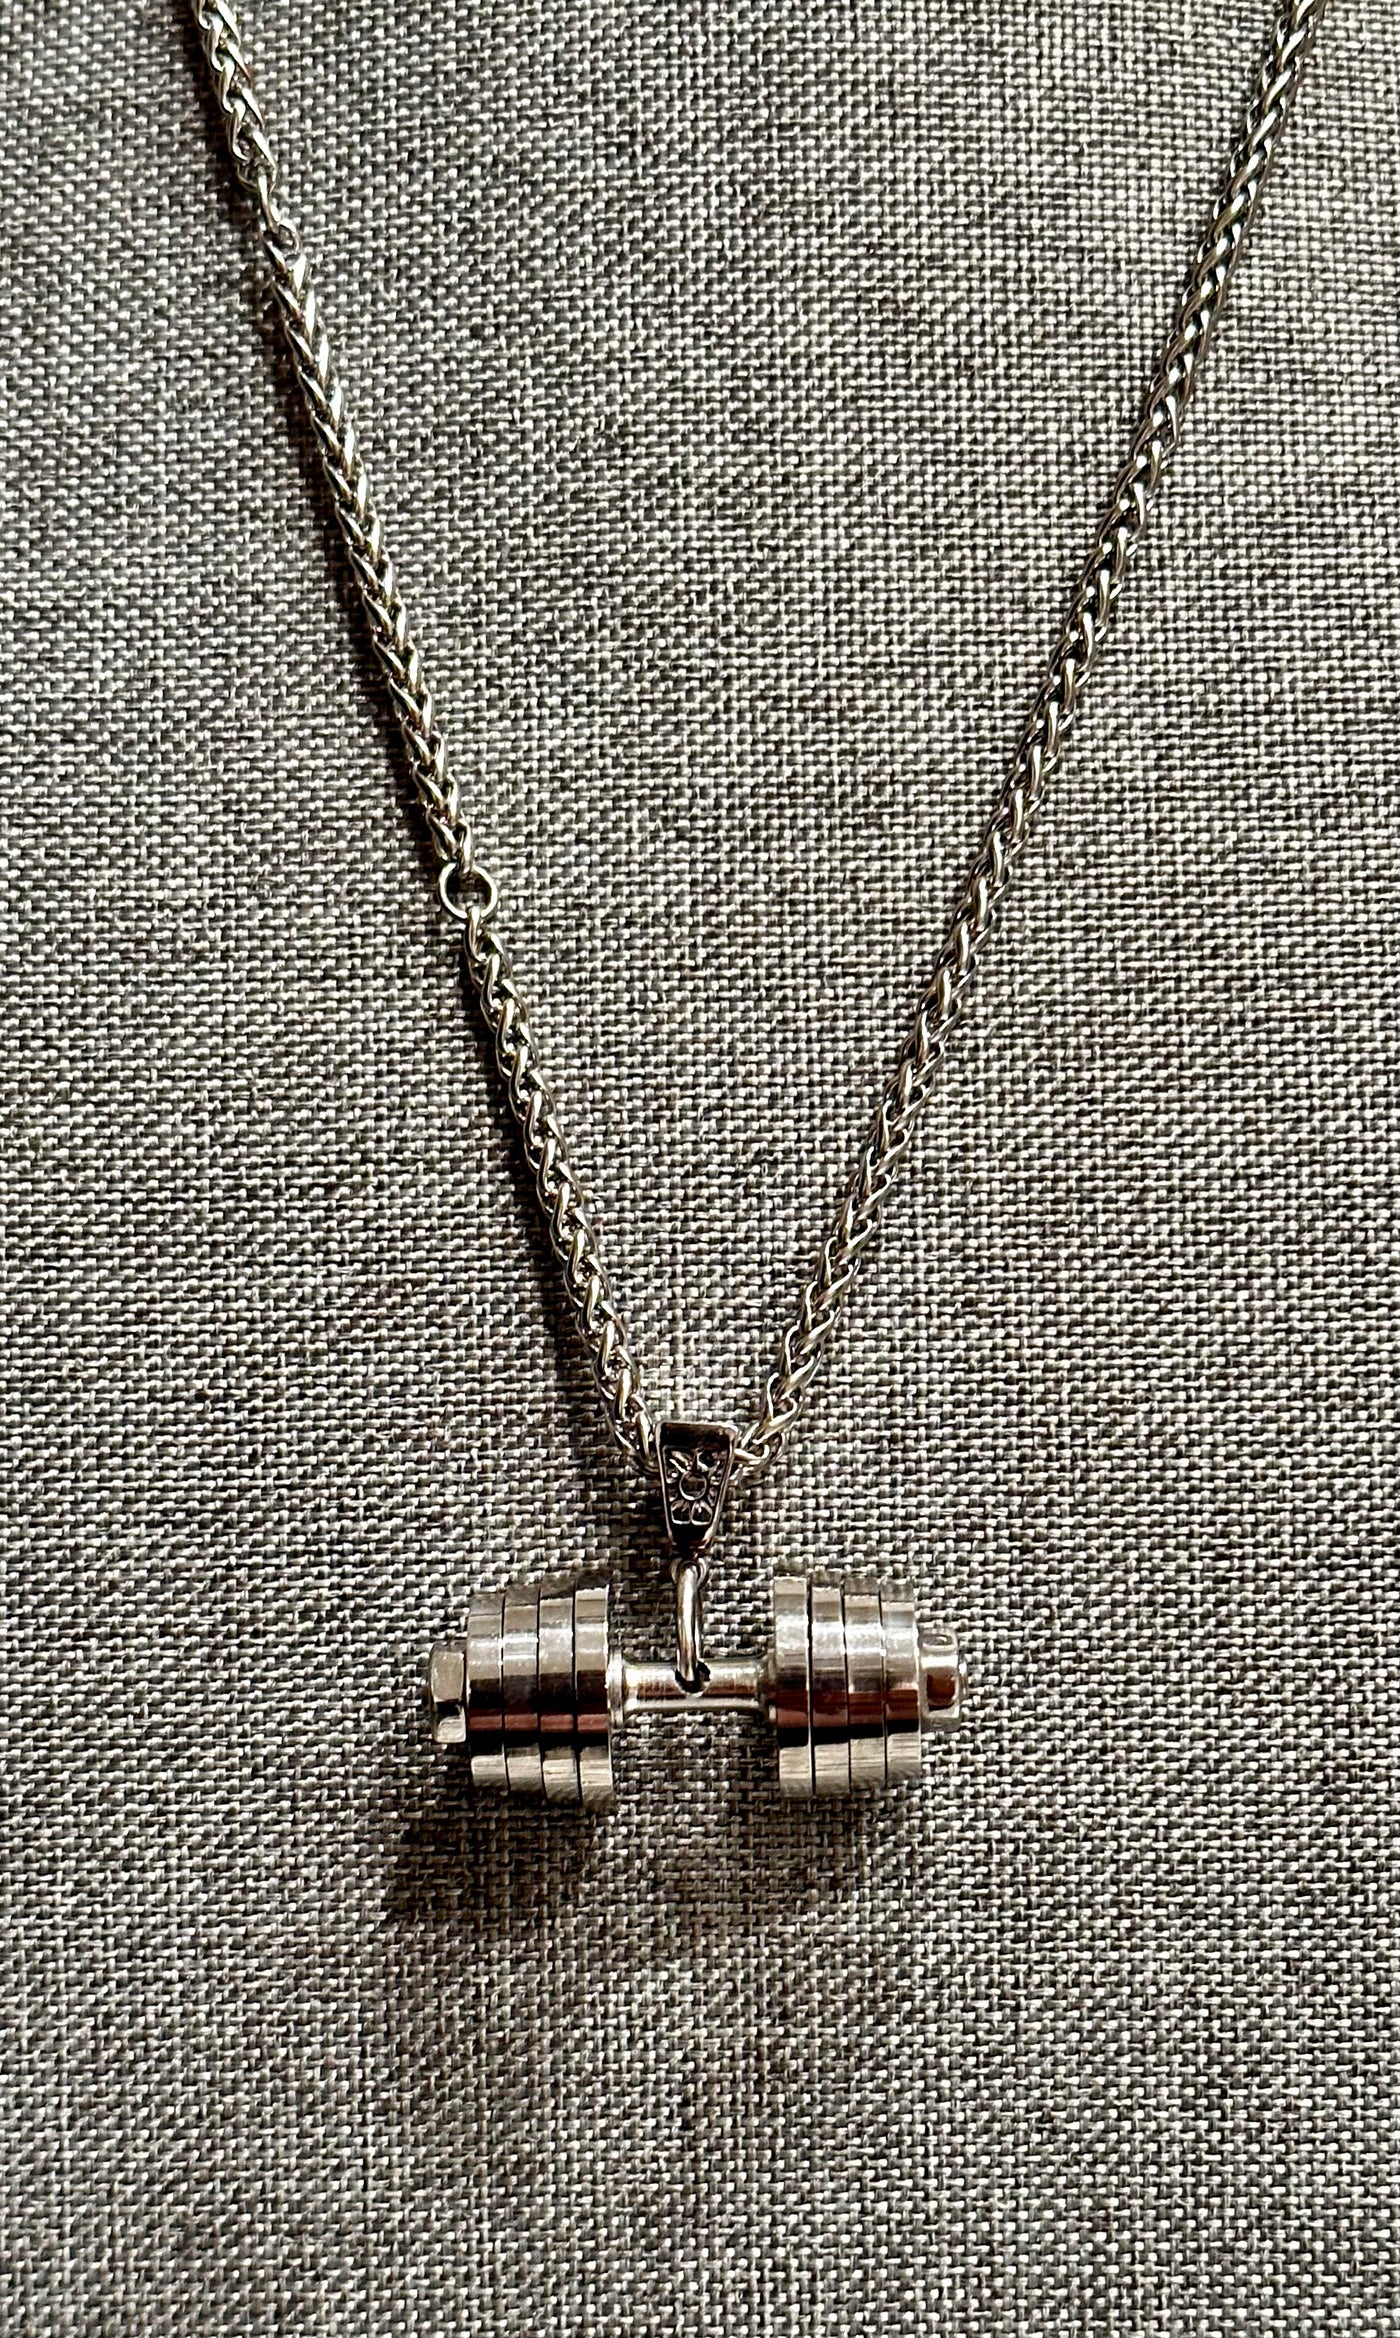 Silver Stainless Steel Dumbbell Necklace with a dumbbell pendant that comes apart - Brent's Bling